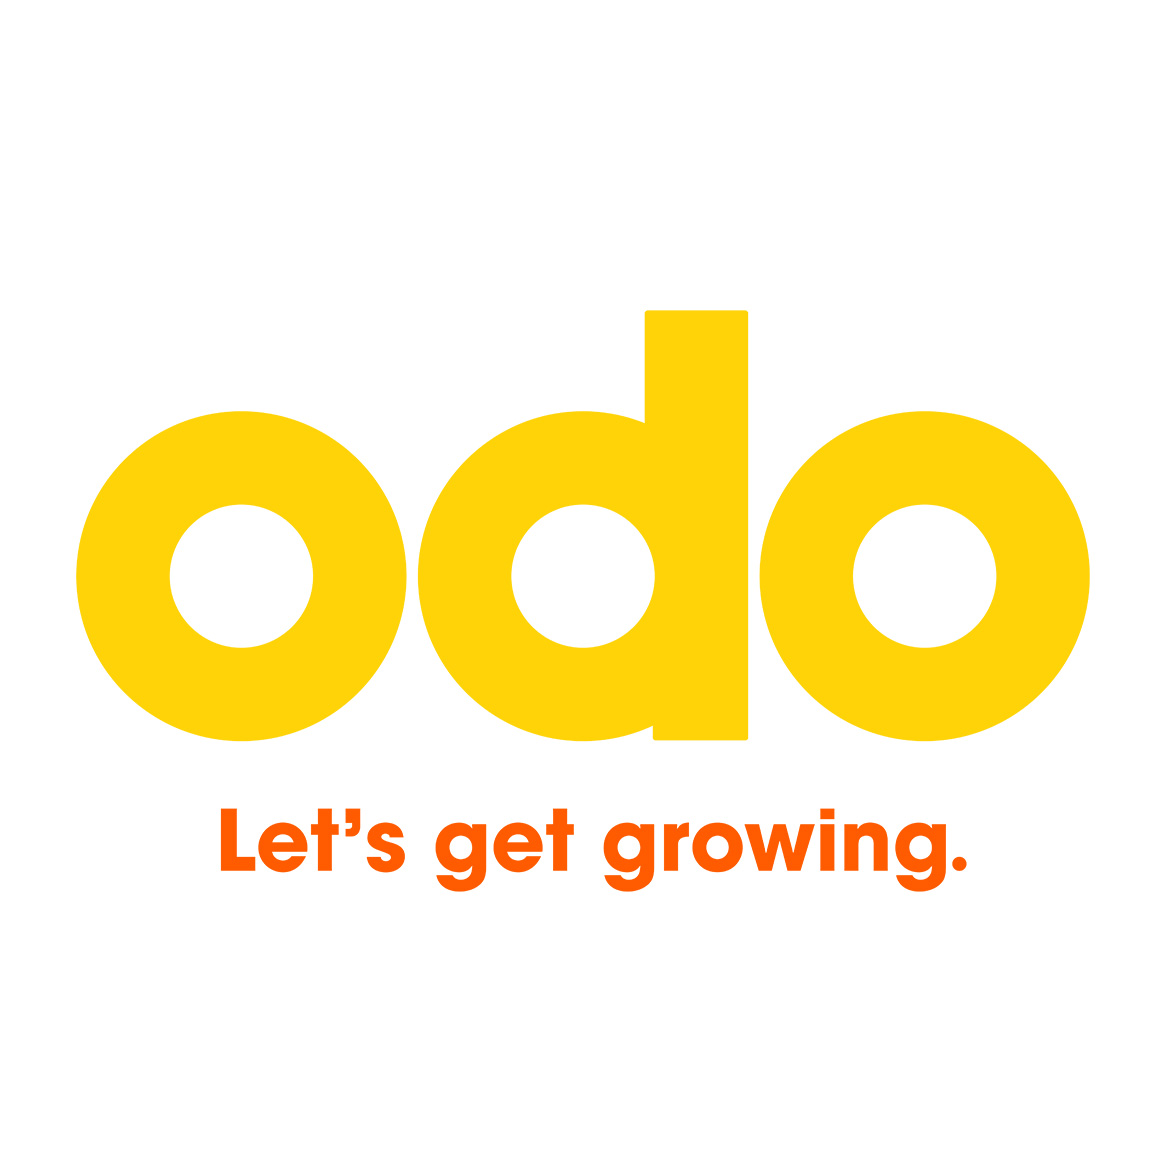 Odo logo design by logo designer Joshua Berman Design for your inspiration and for the worlds largest logo competition